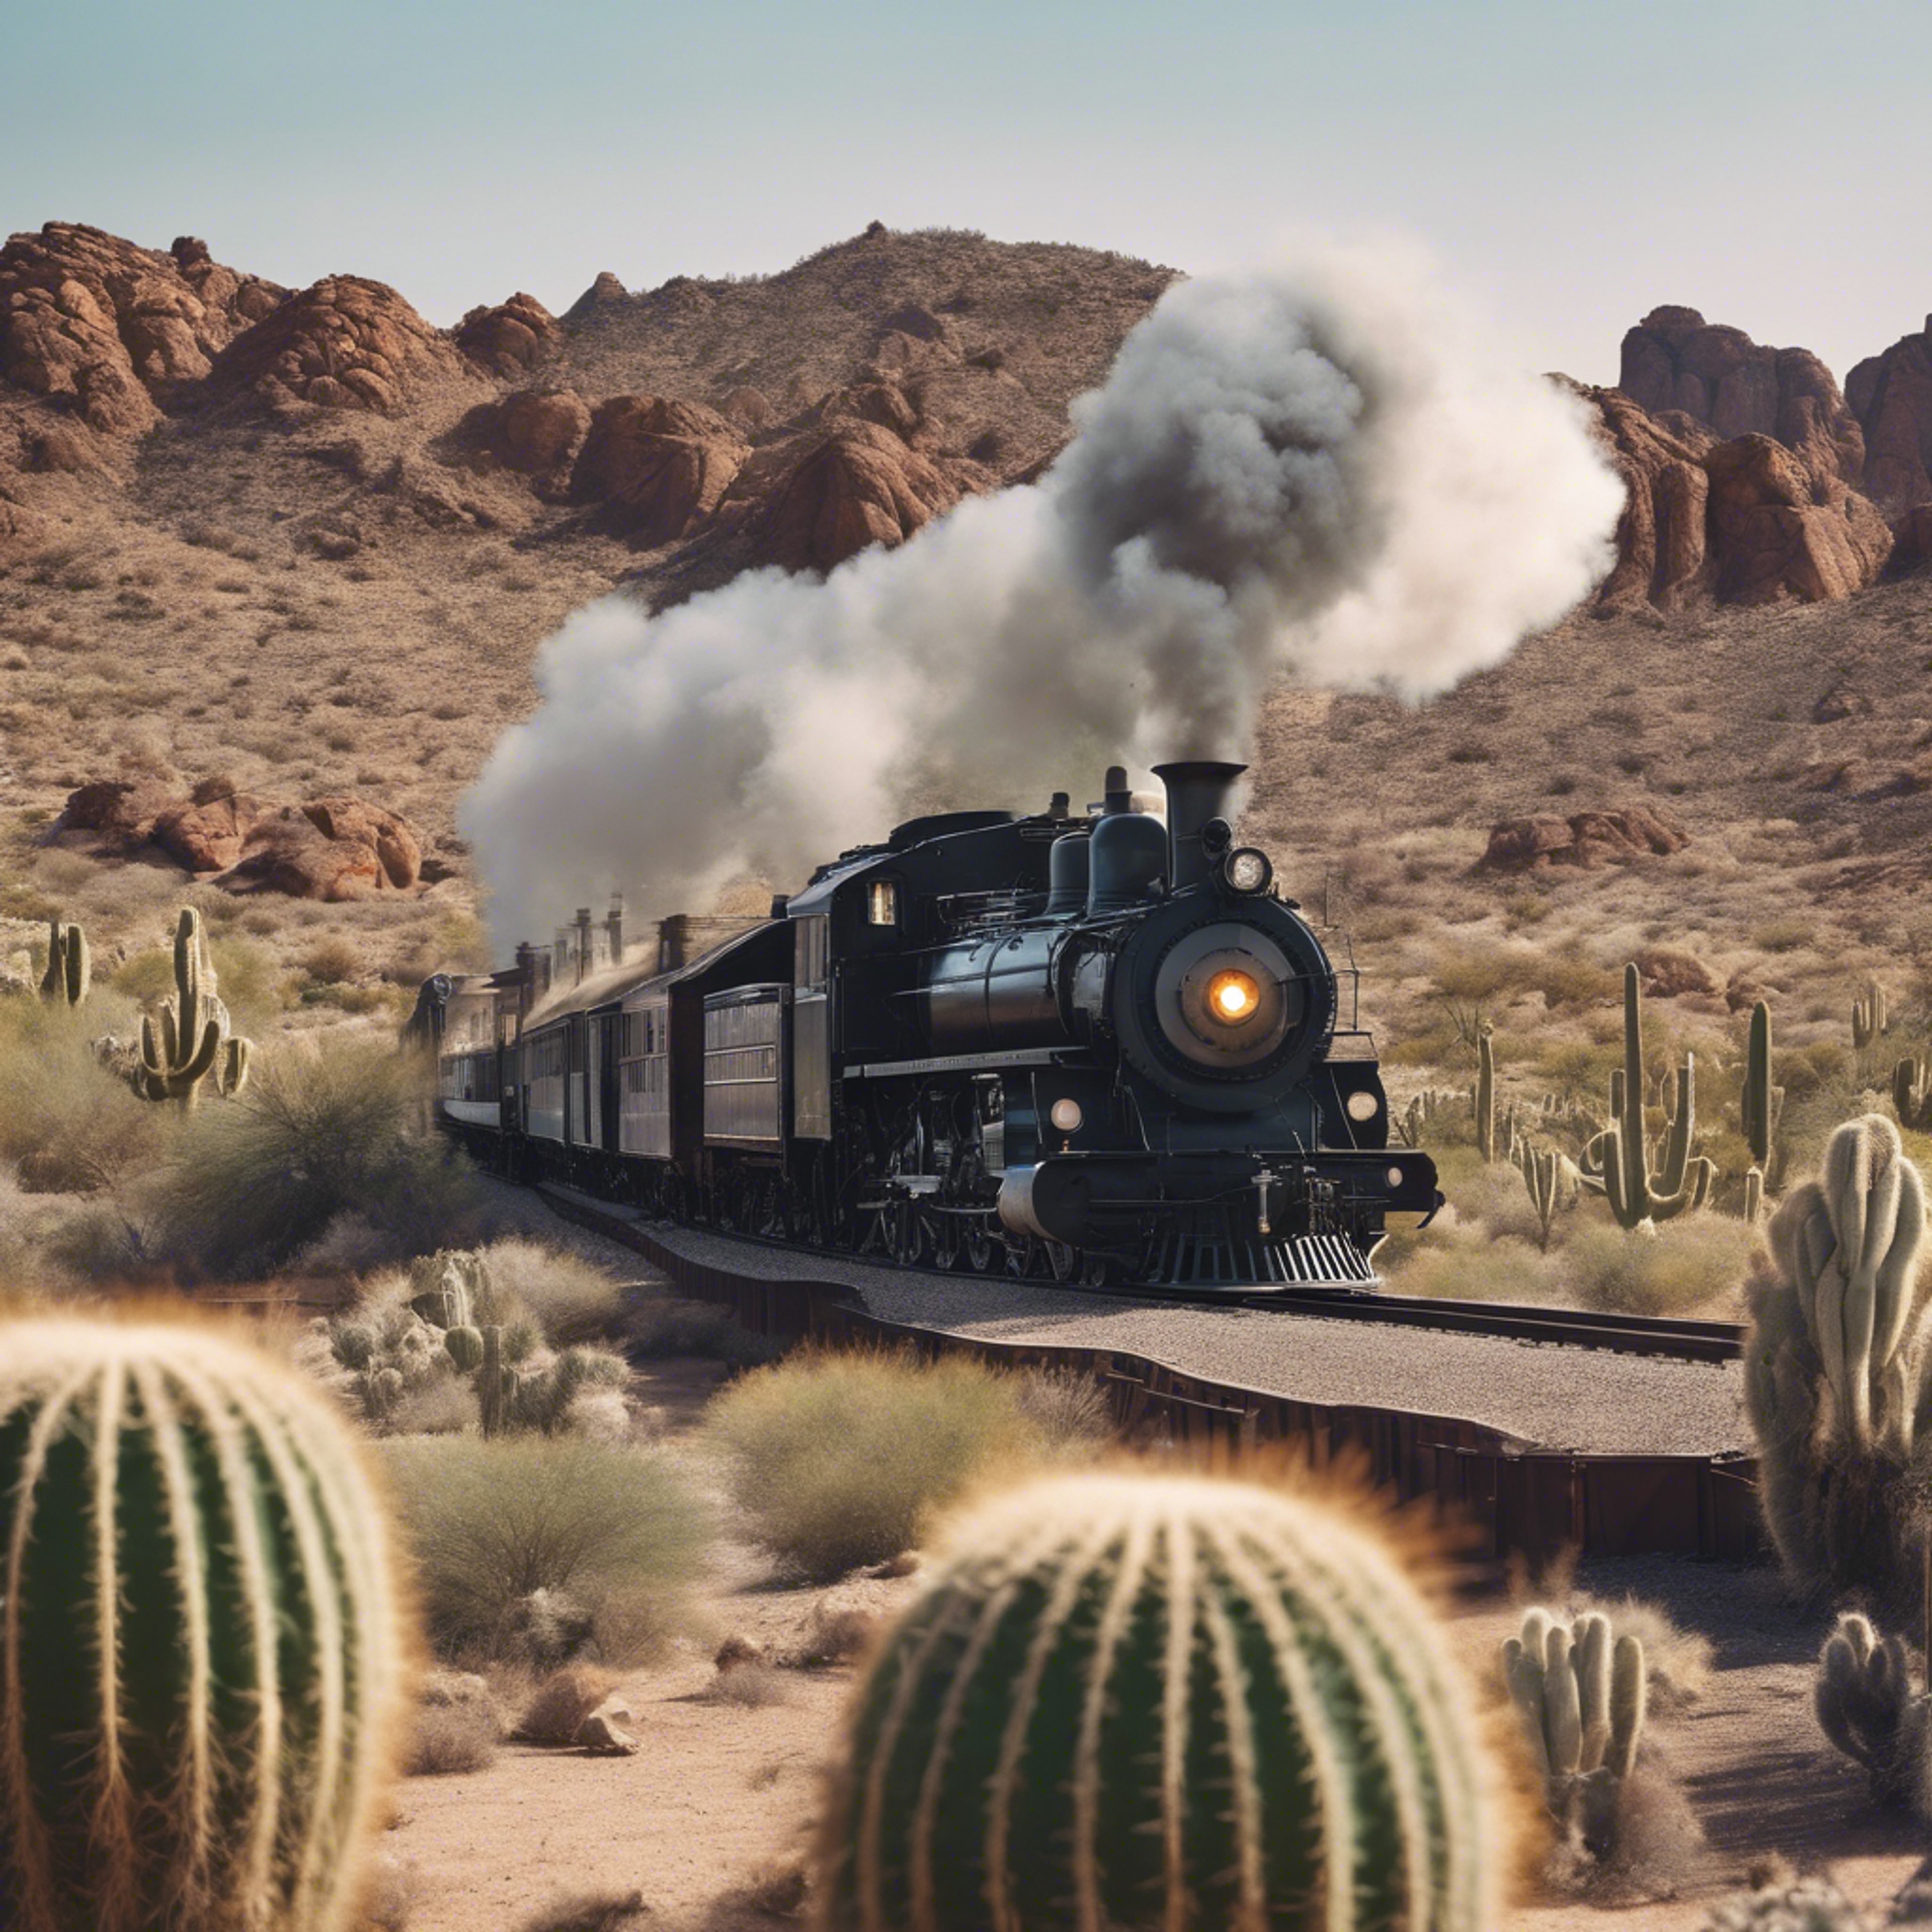 A locomotive steam train rushing across the barren Western landscape surrounded by towering cacti. Fondo de pantalla[f5a4930d44454dd795f5]